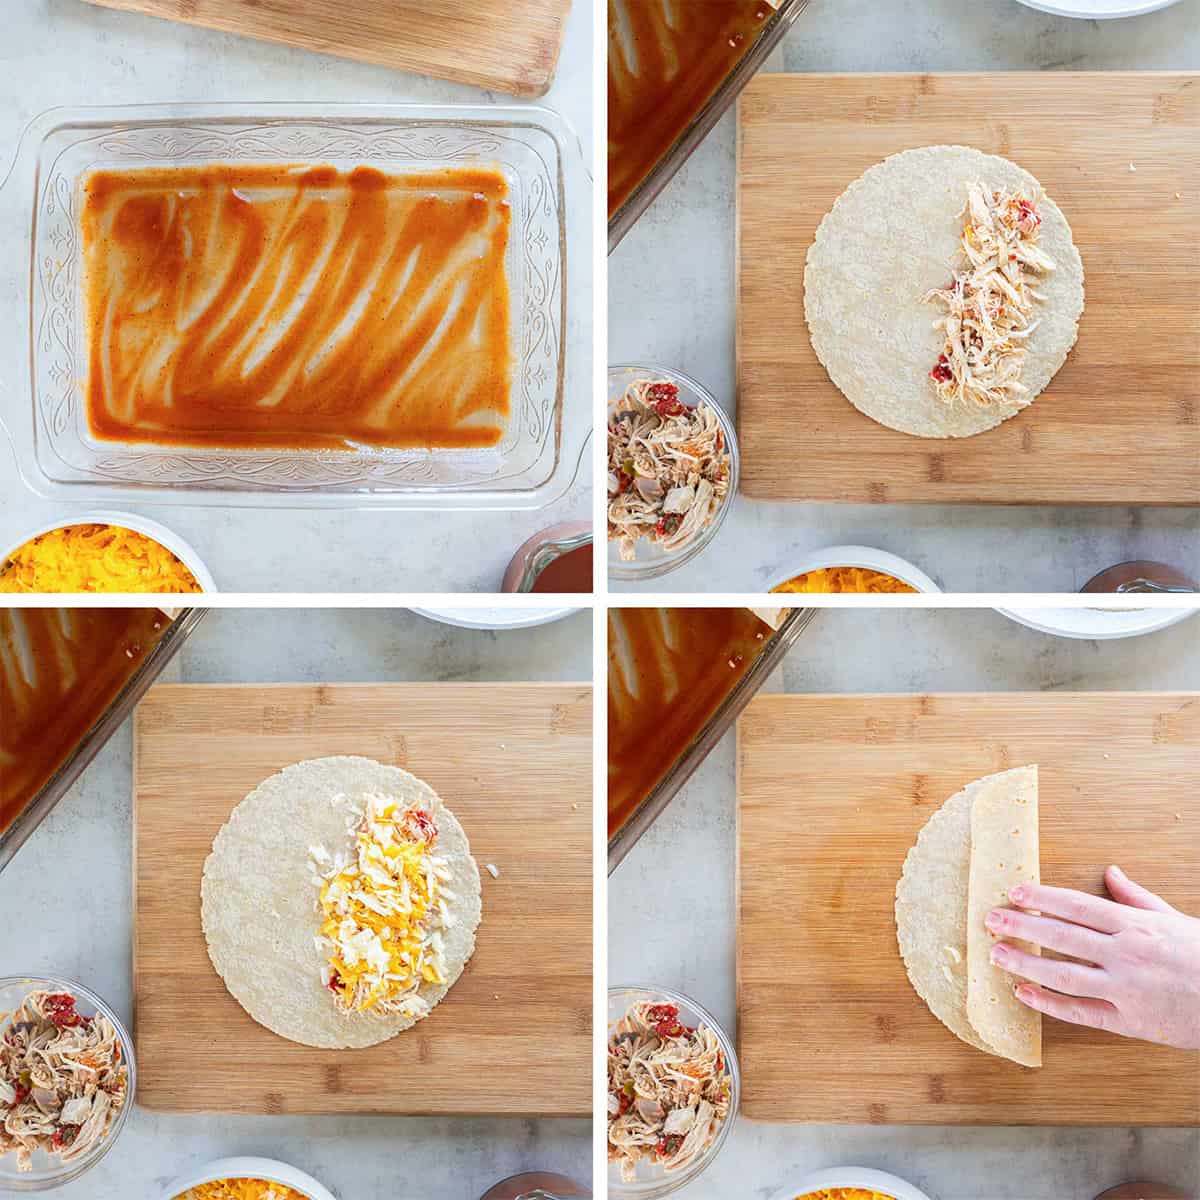 Four images showing enchilada sauce in a baking dish and chicken and cheese being rolled up in a tortilla.